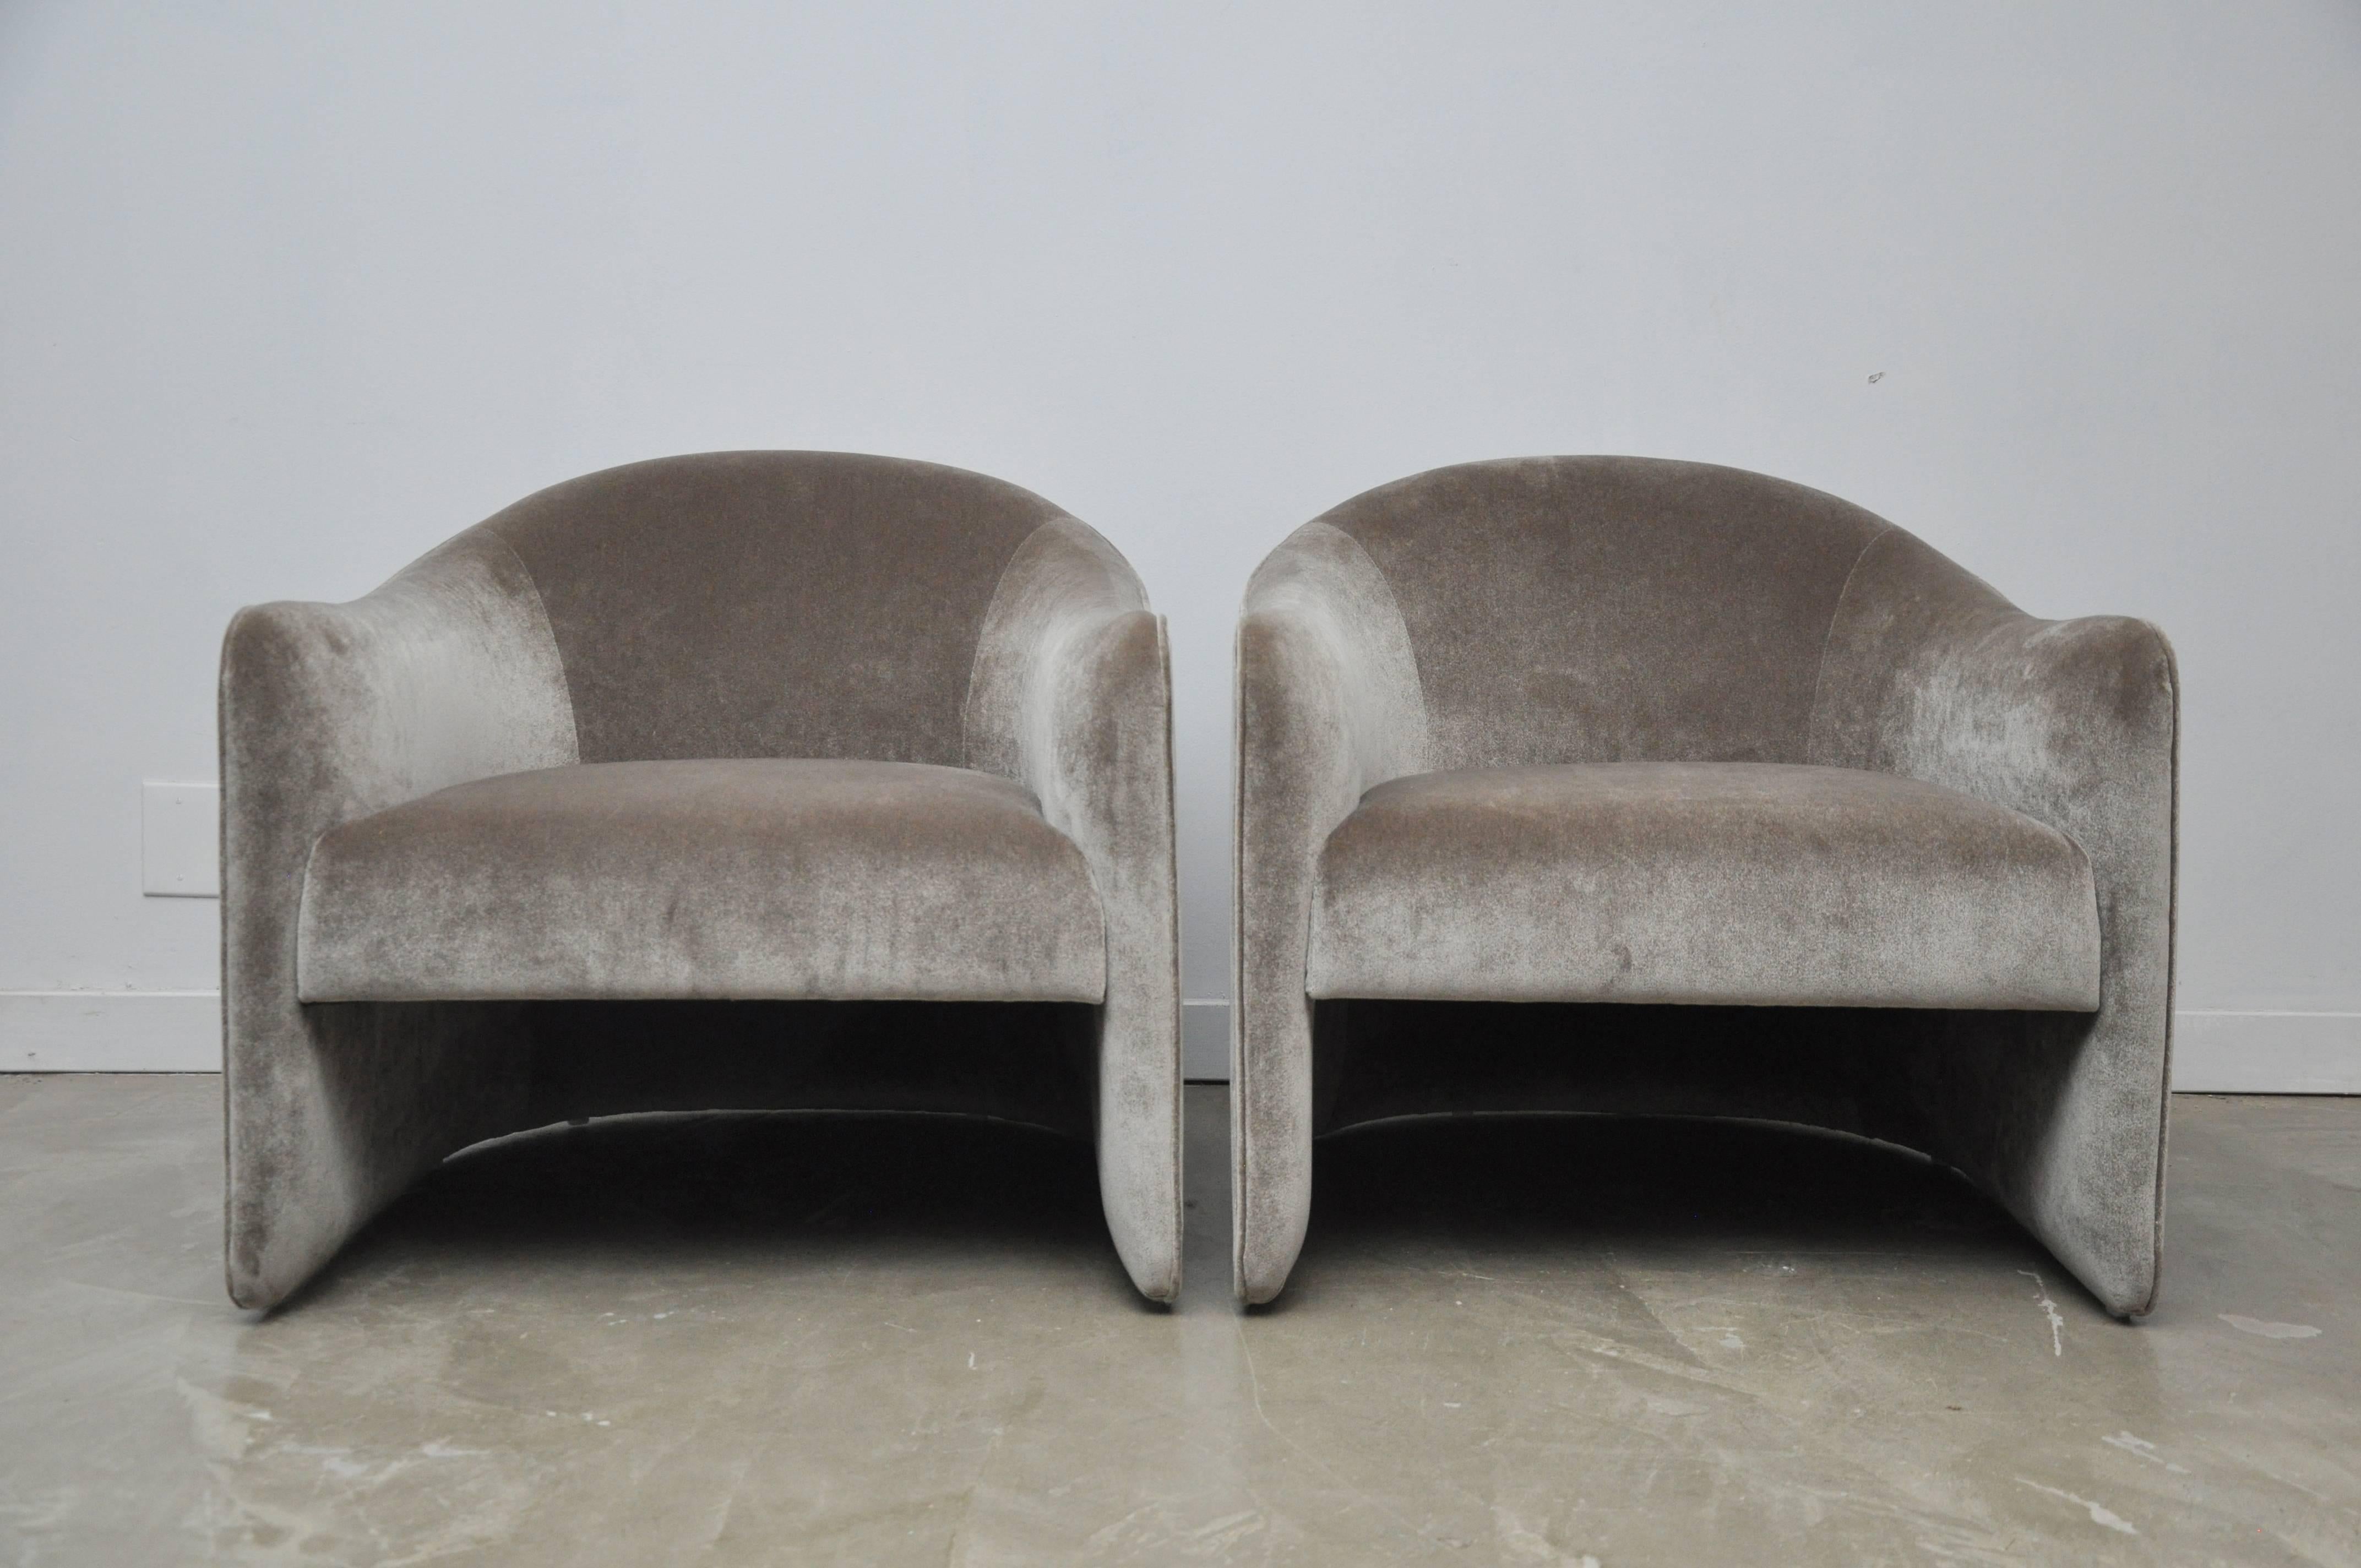 Barrel back lounge chairs, circa 1970. Fully restored with all new foam and low pile velvet upholstery.